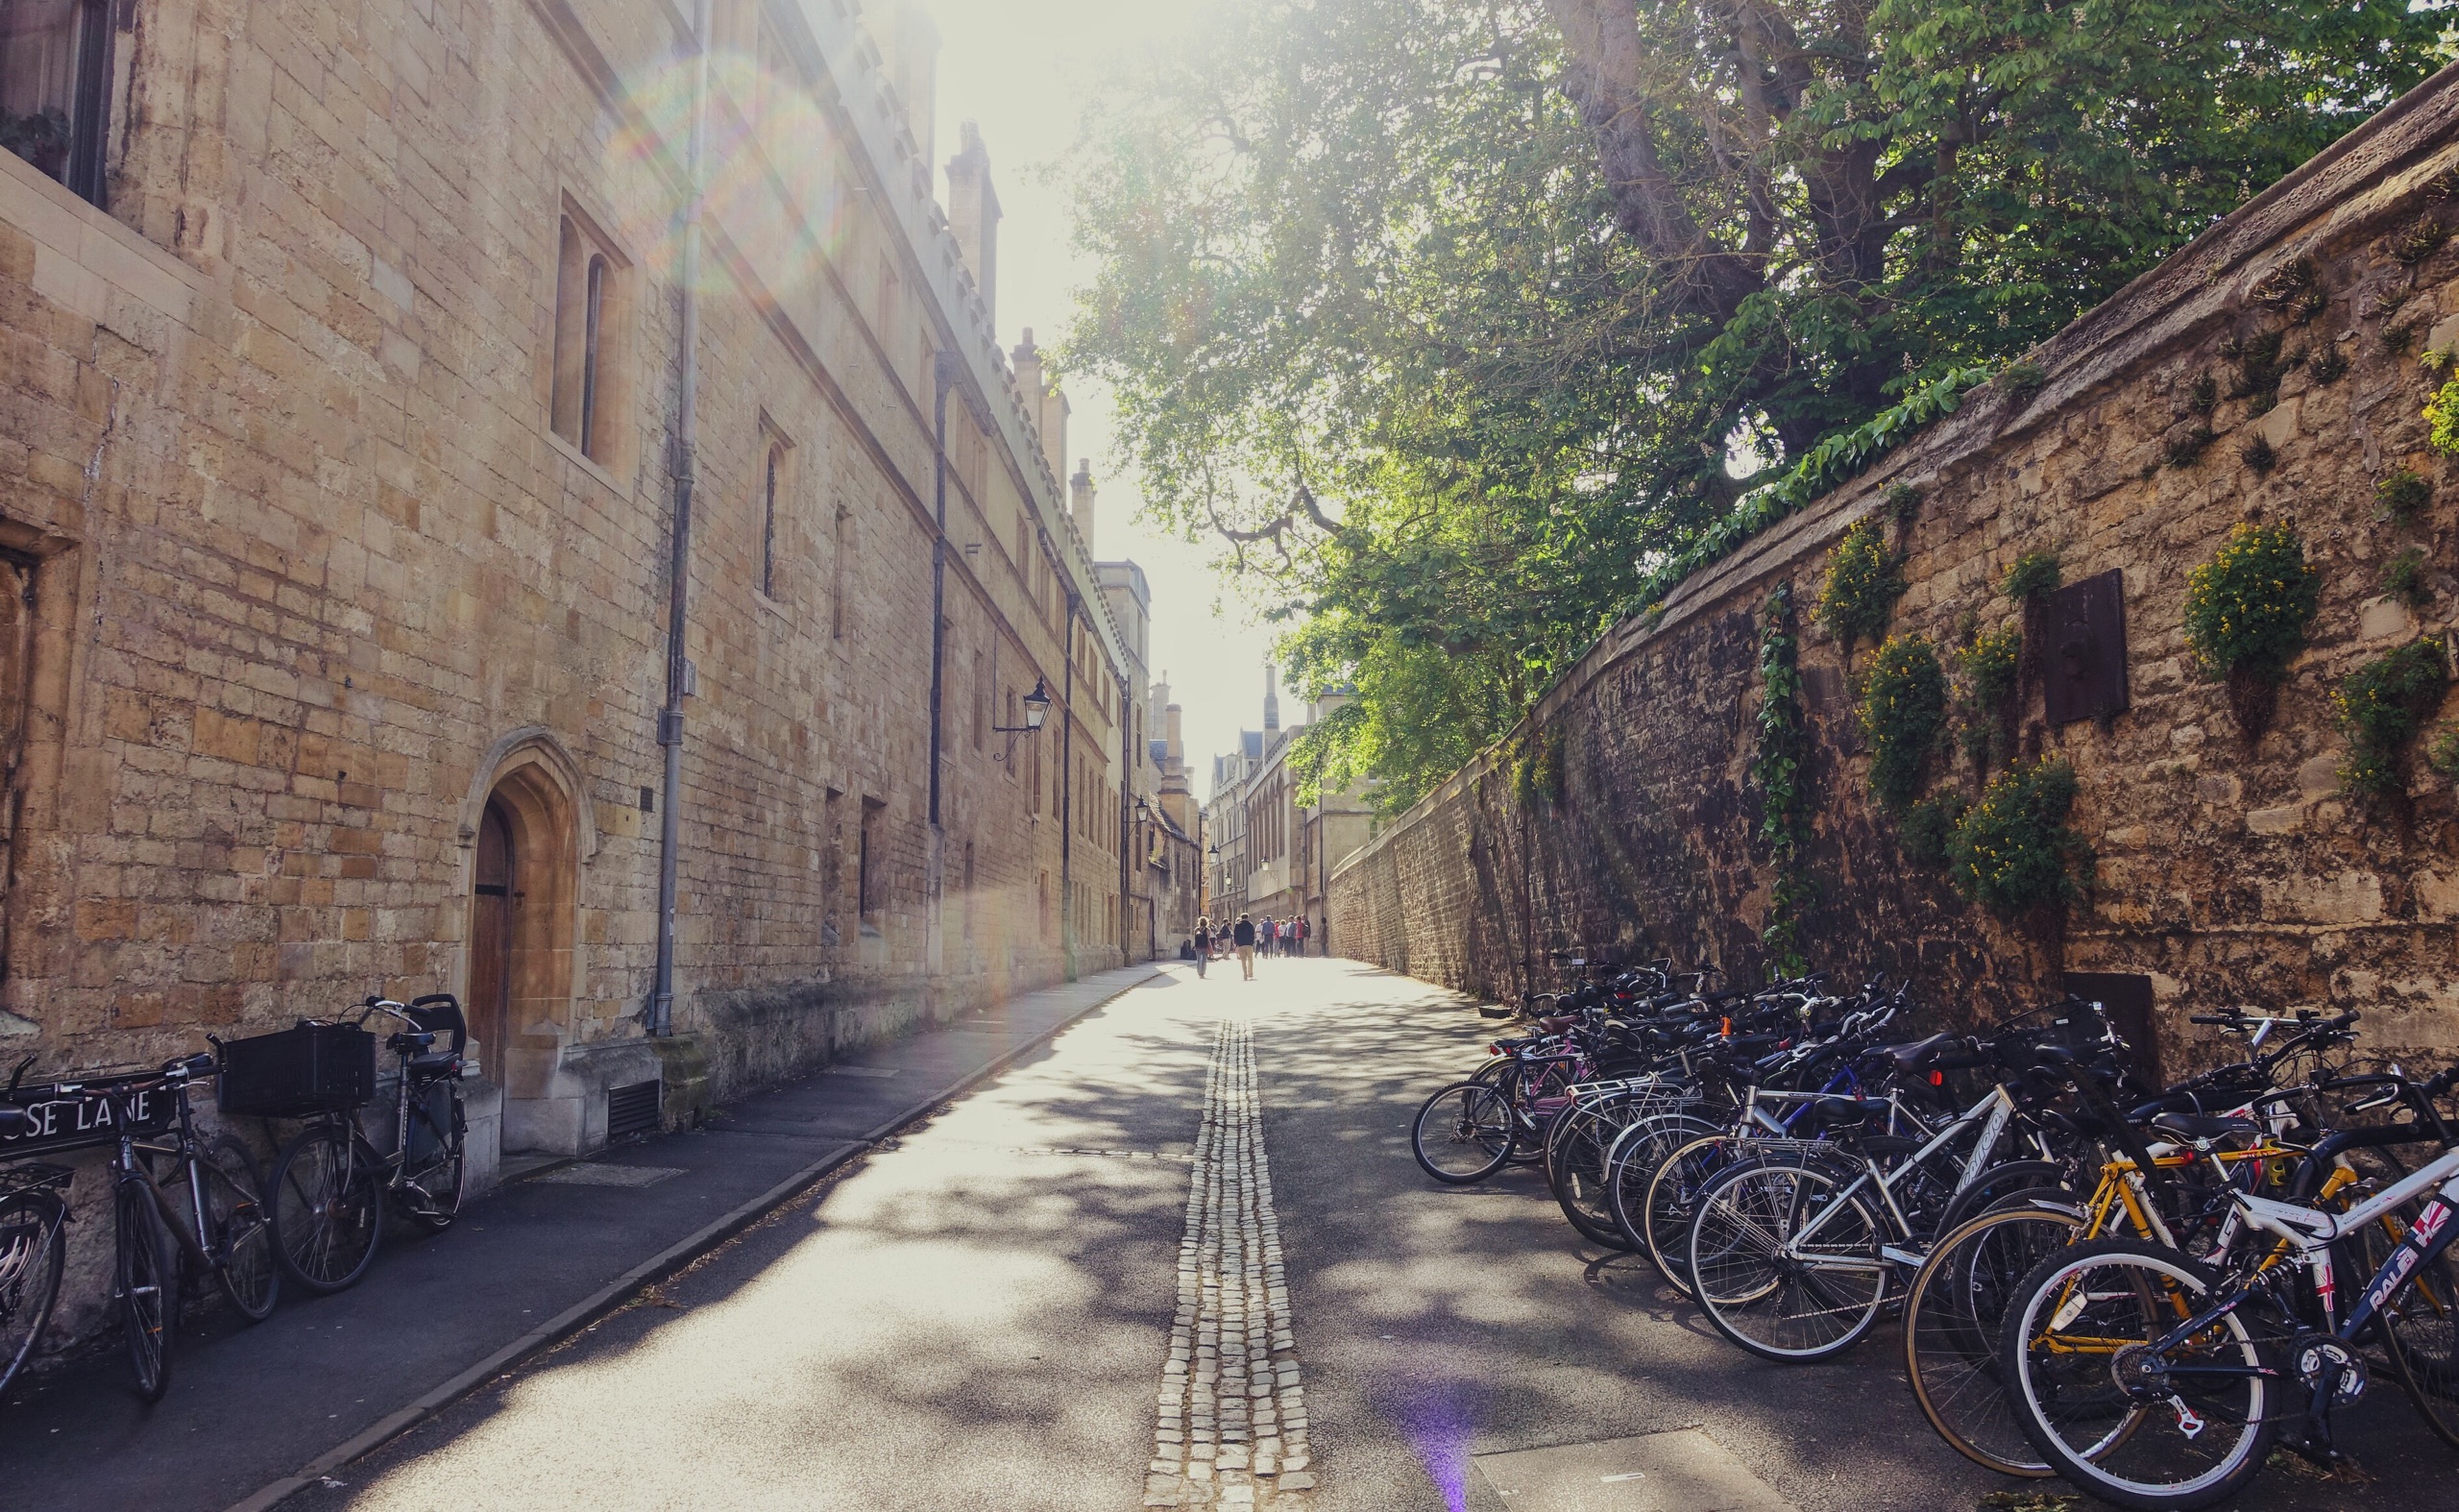 The streets of Oxford, England